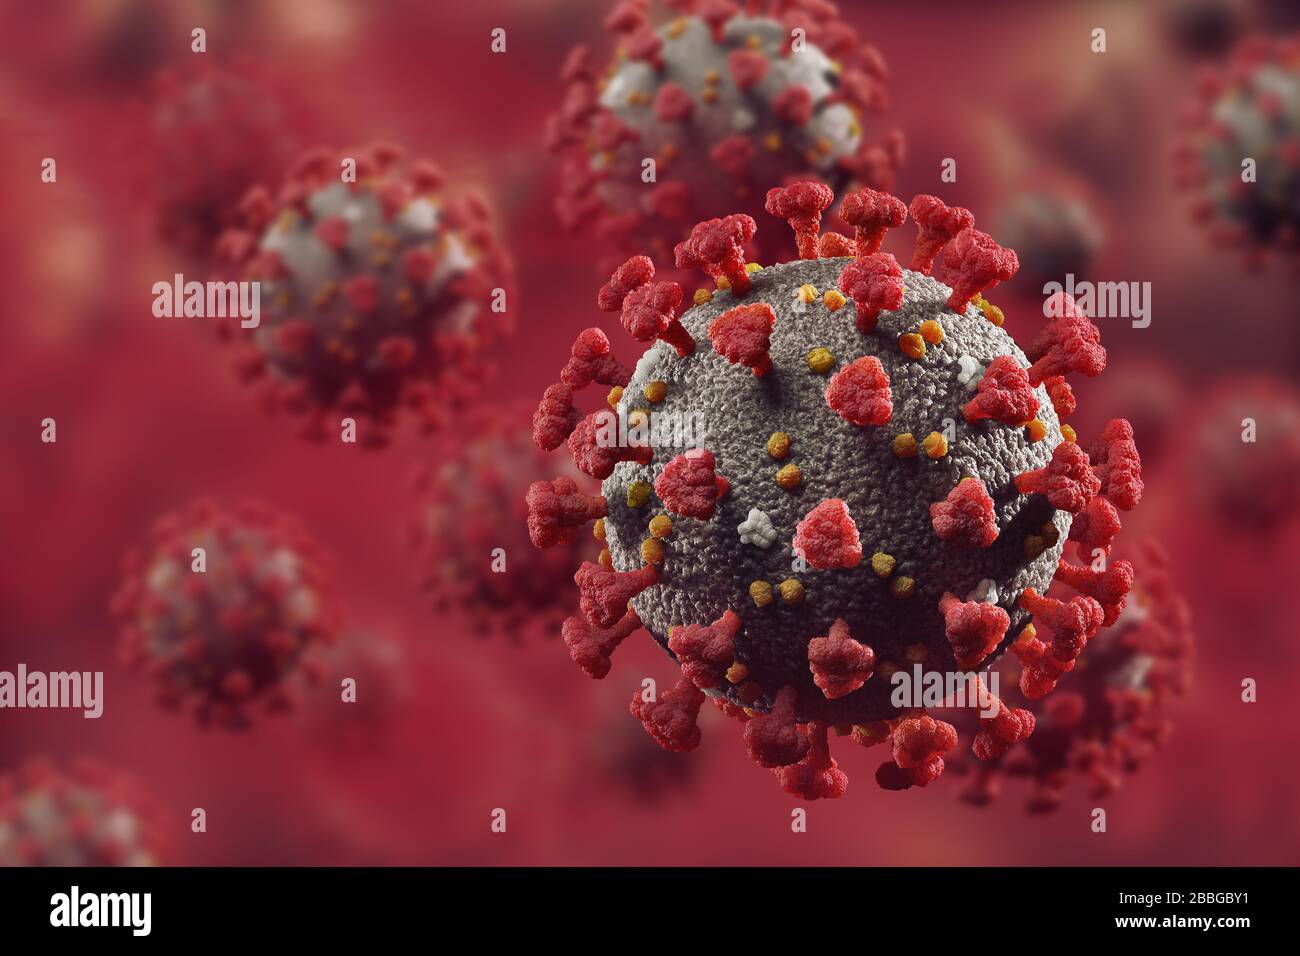 Coronavirus, COVID-19, Corona virus particles, virions in red blood stream. SARS-CoV-2 artistic medical 3D illustration in color. Stock Photo